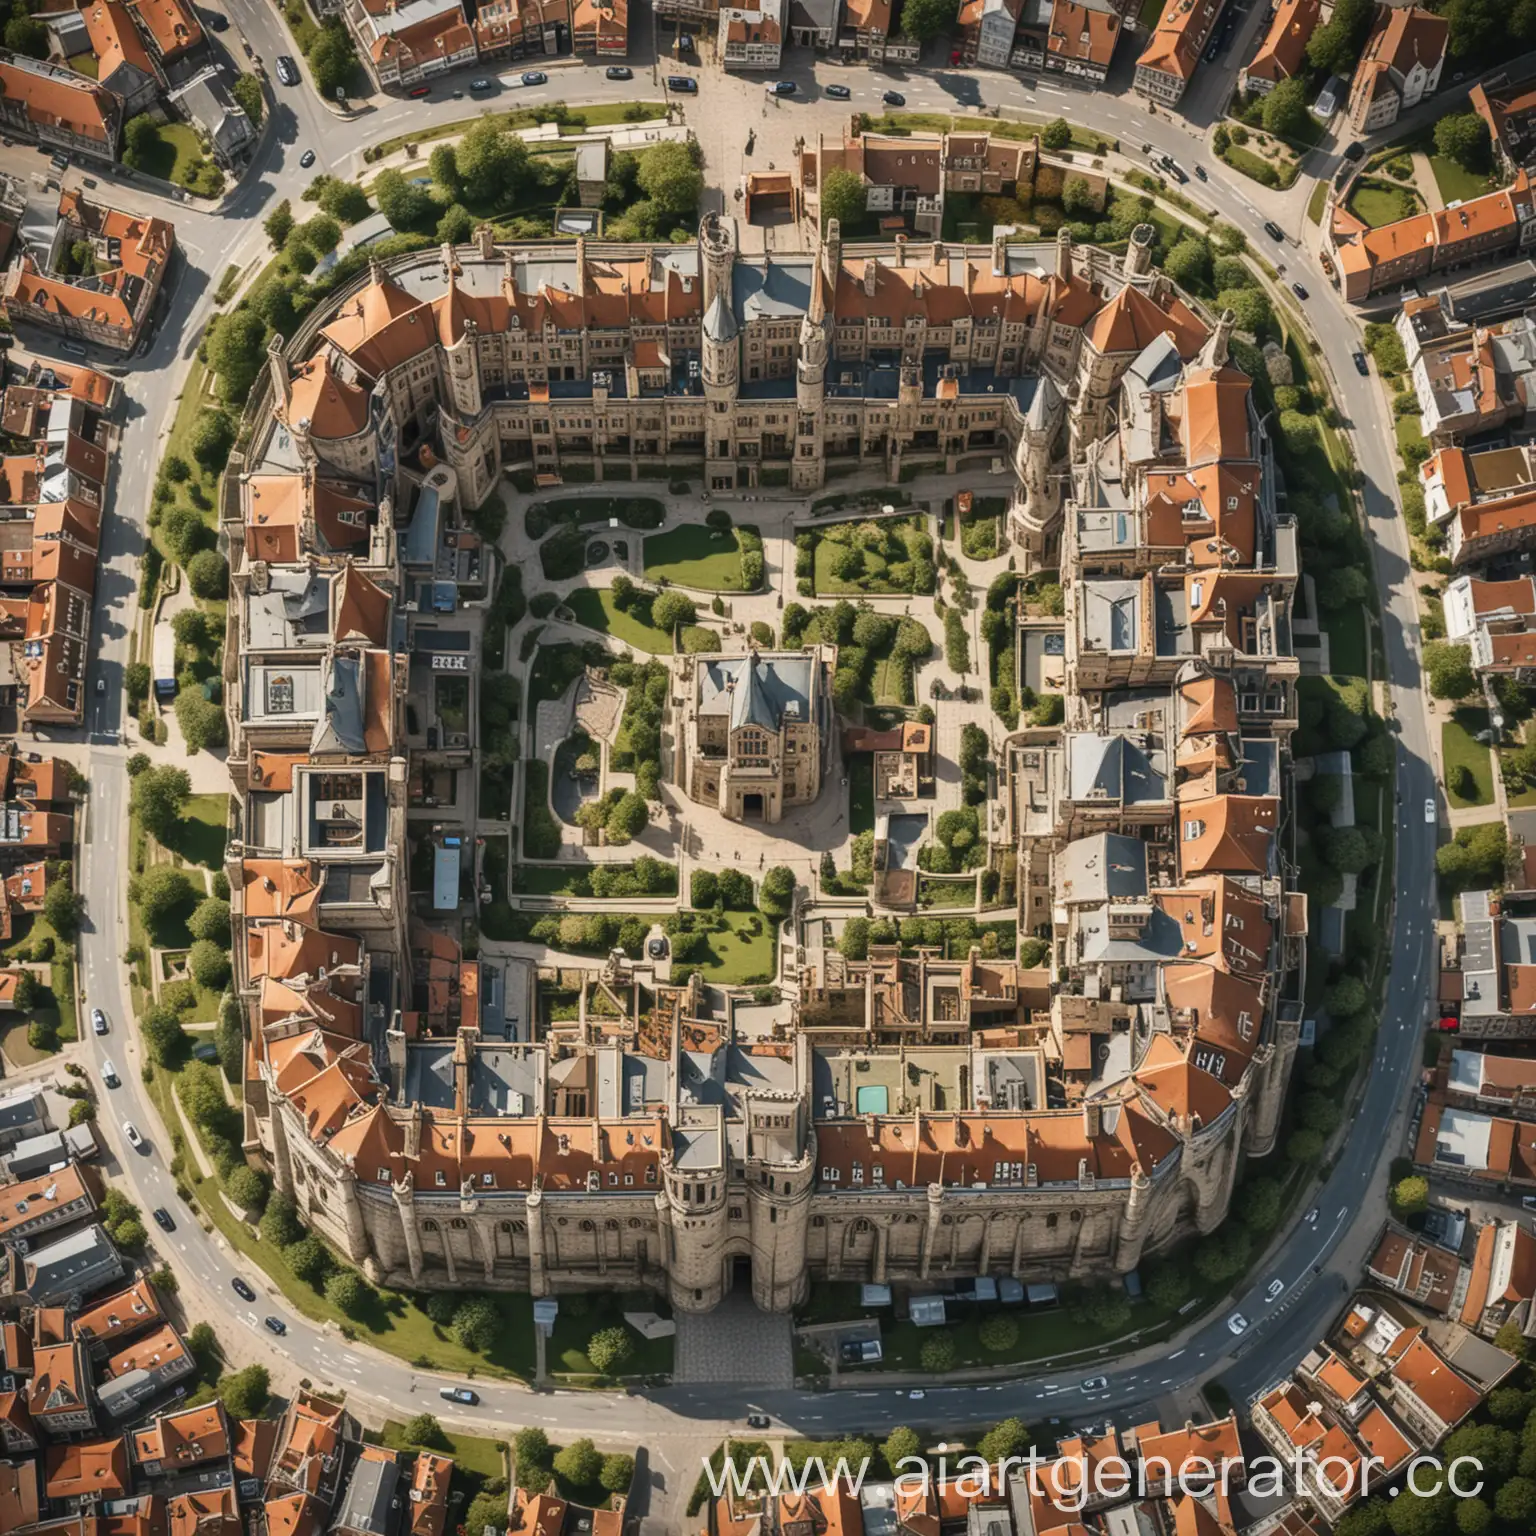 a castle in the center in the form of a rectangle with rounded corners, around it a city with houses in the English style, wide beautiful streets, and all of this is depicted as a city plan from a top-down view